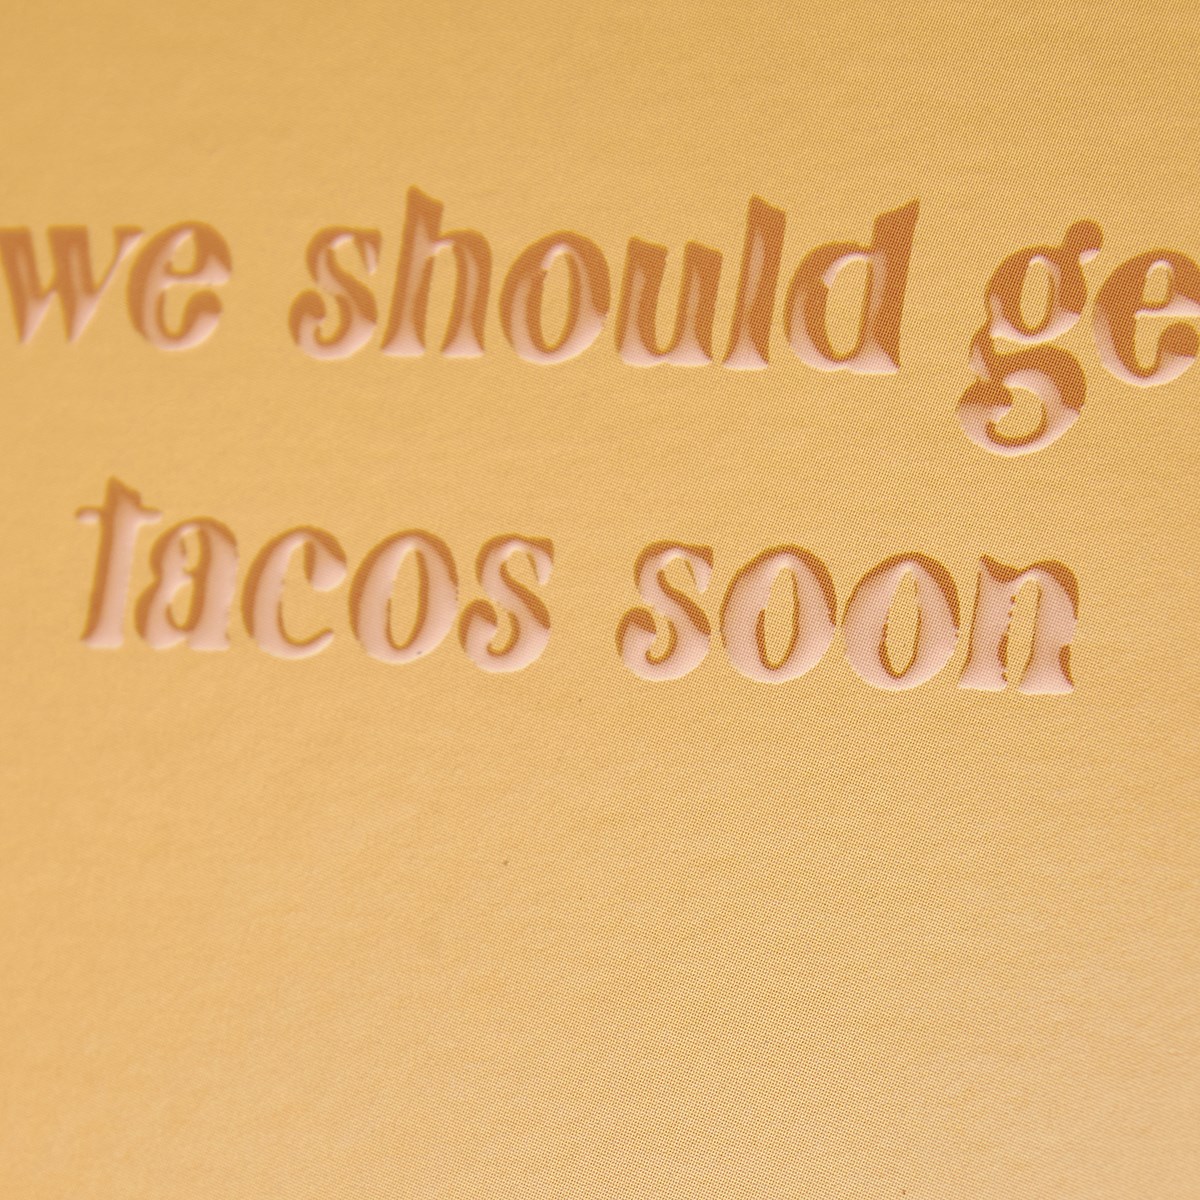 We Should Get Tacos Soon Greeting Card - Paper